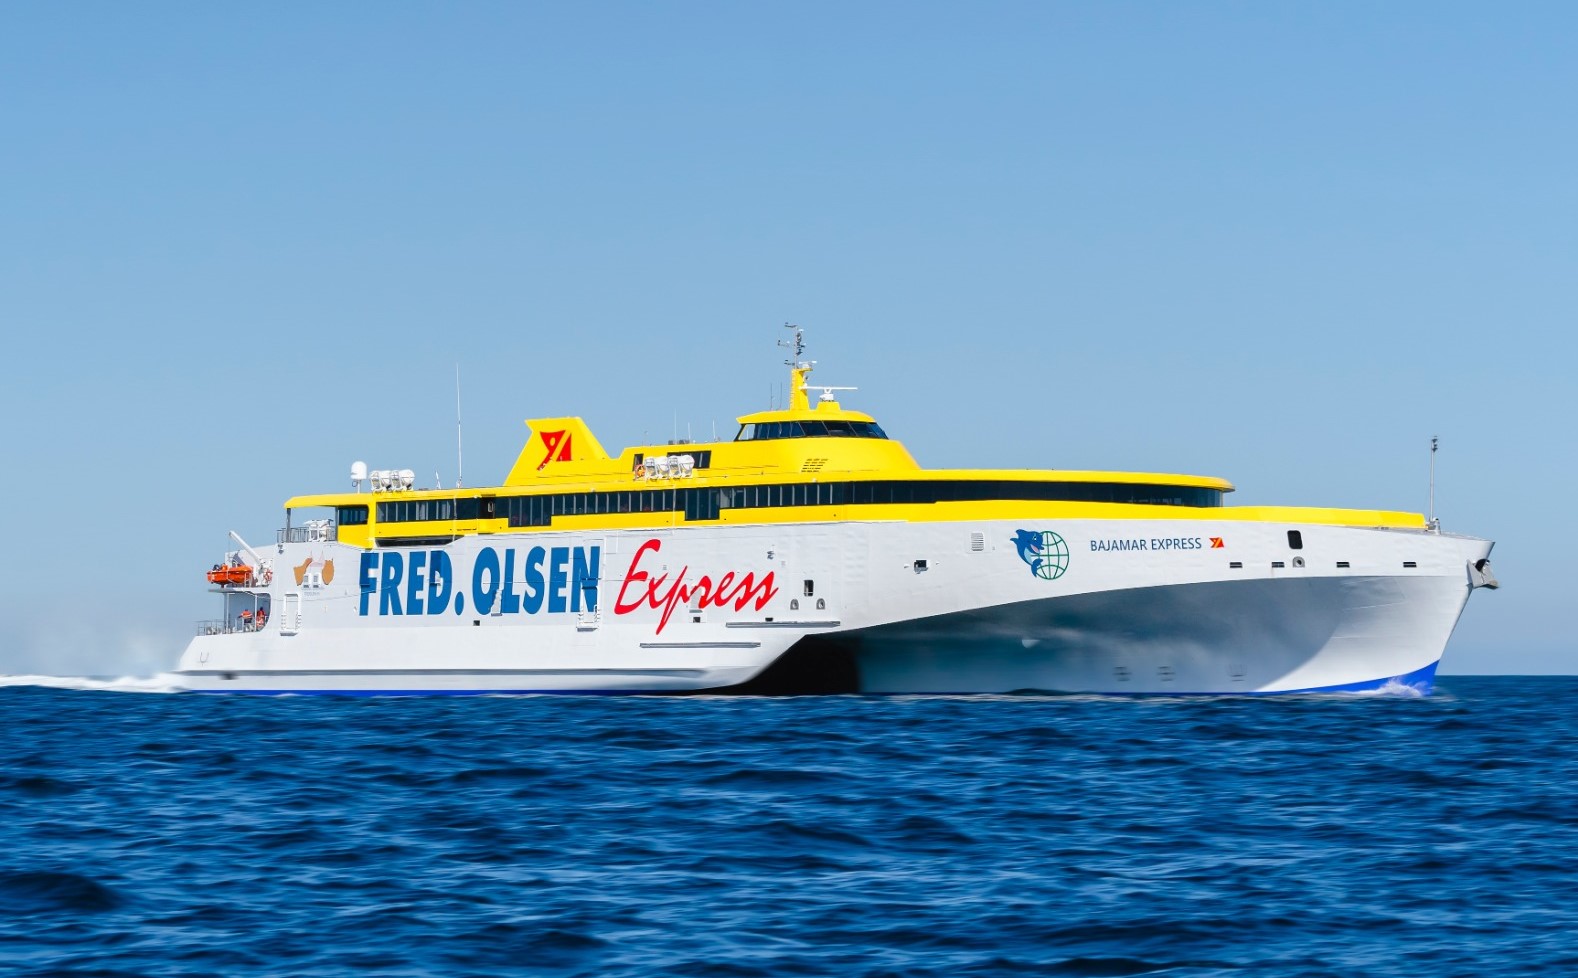 Fred Olsen relies on our coin drawers for his ferries